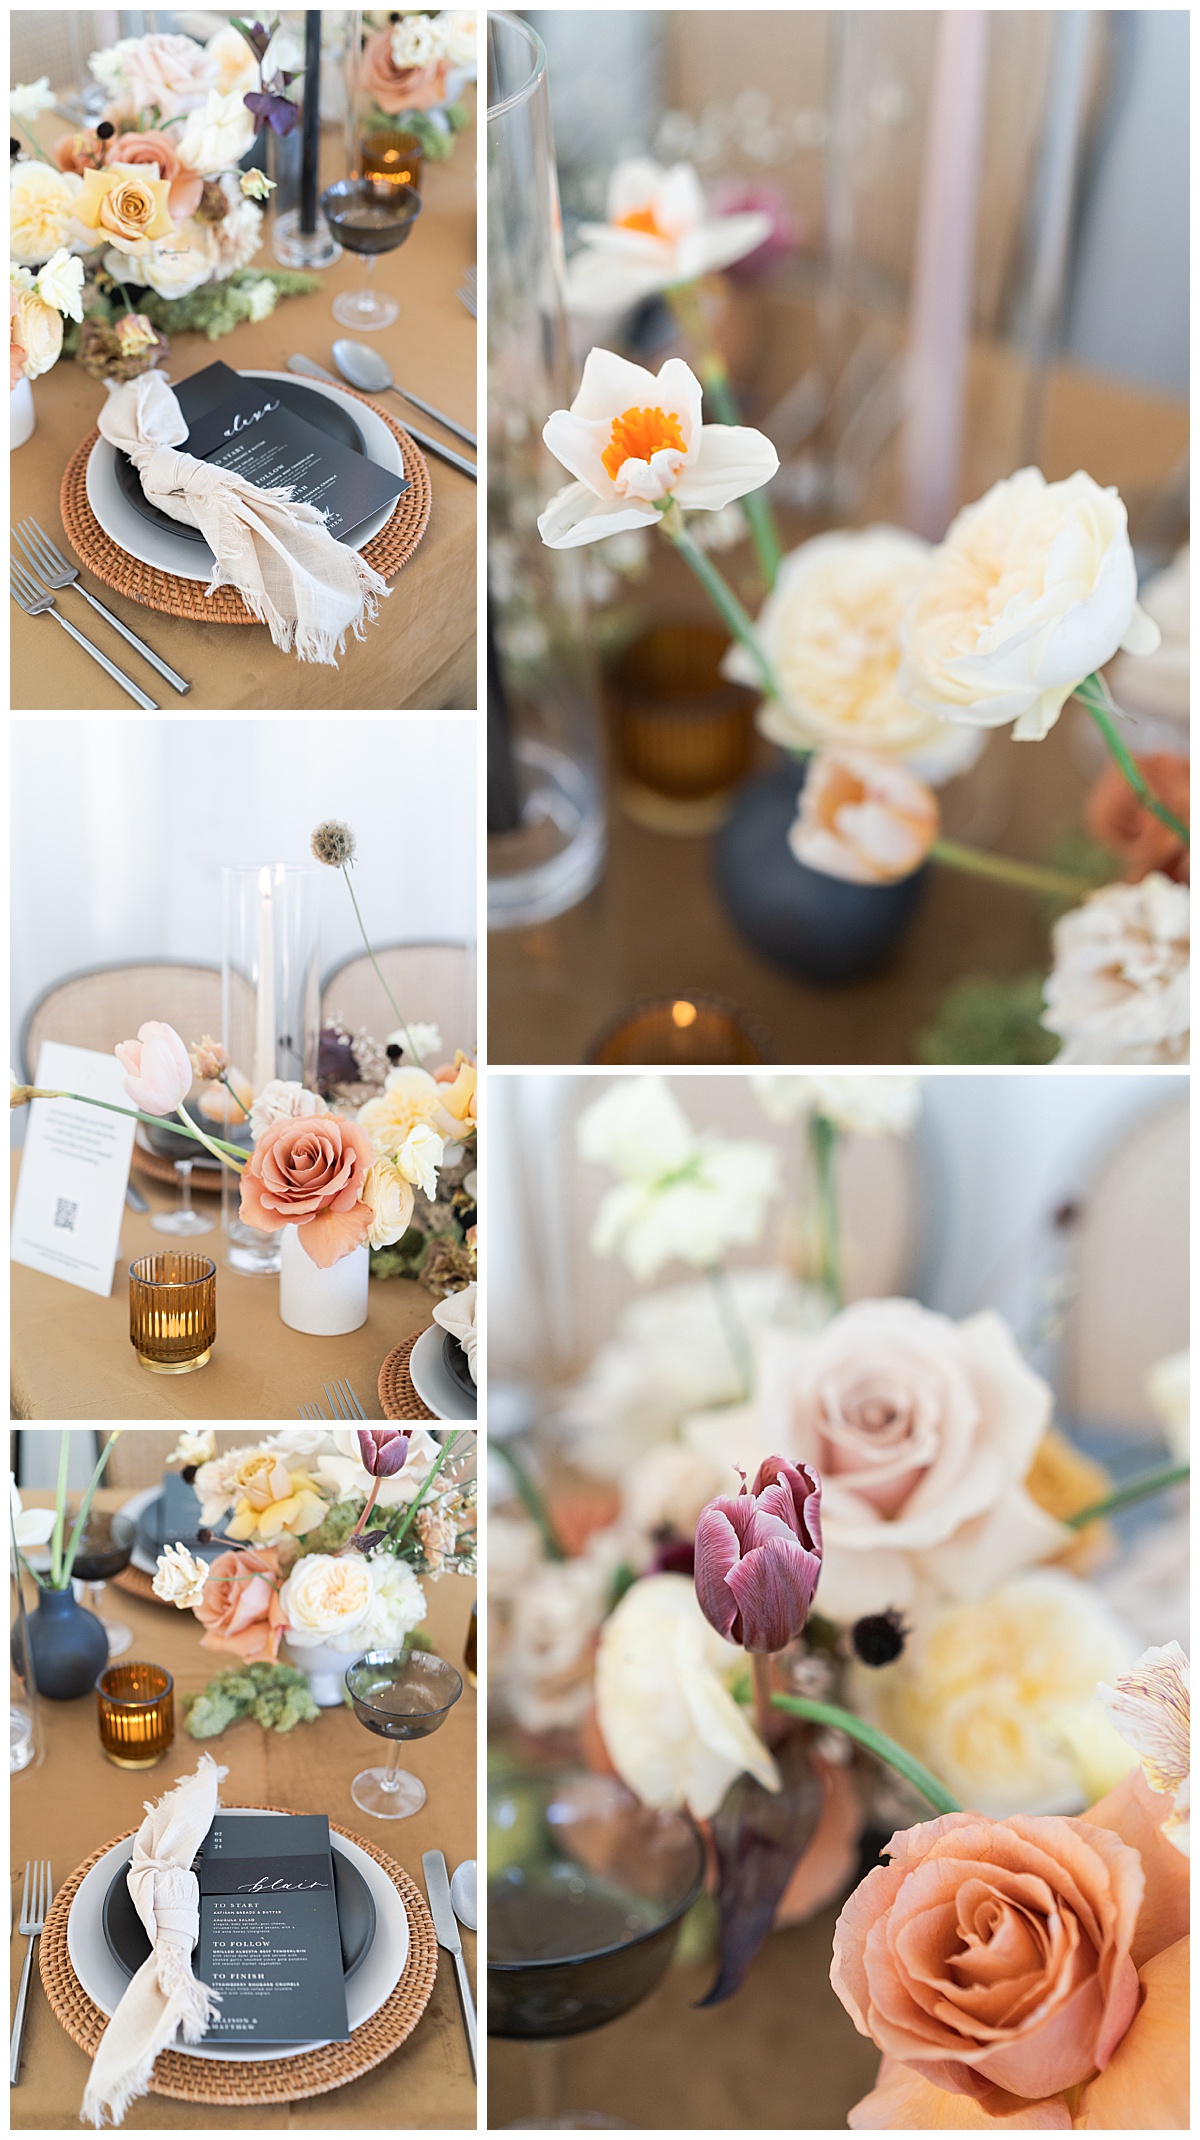 Floral arrangements and table settings by Swish & Click Photography